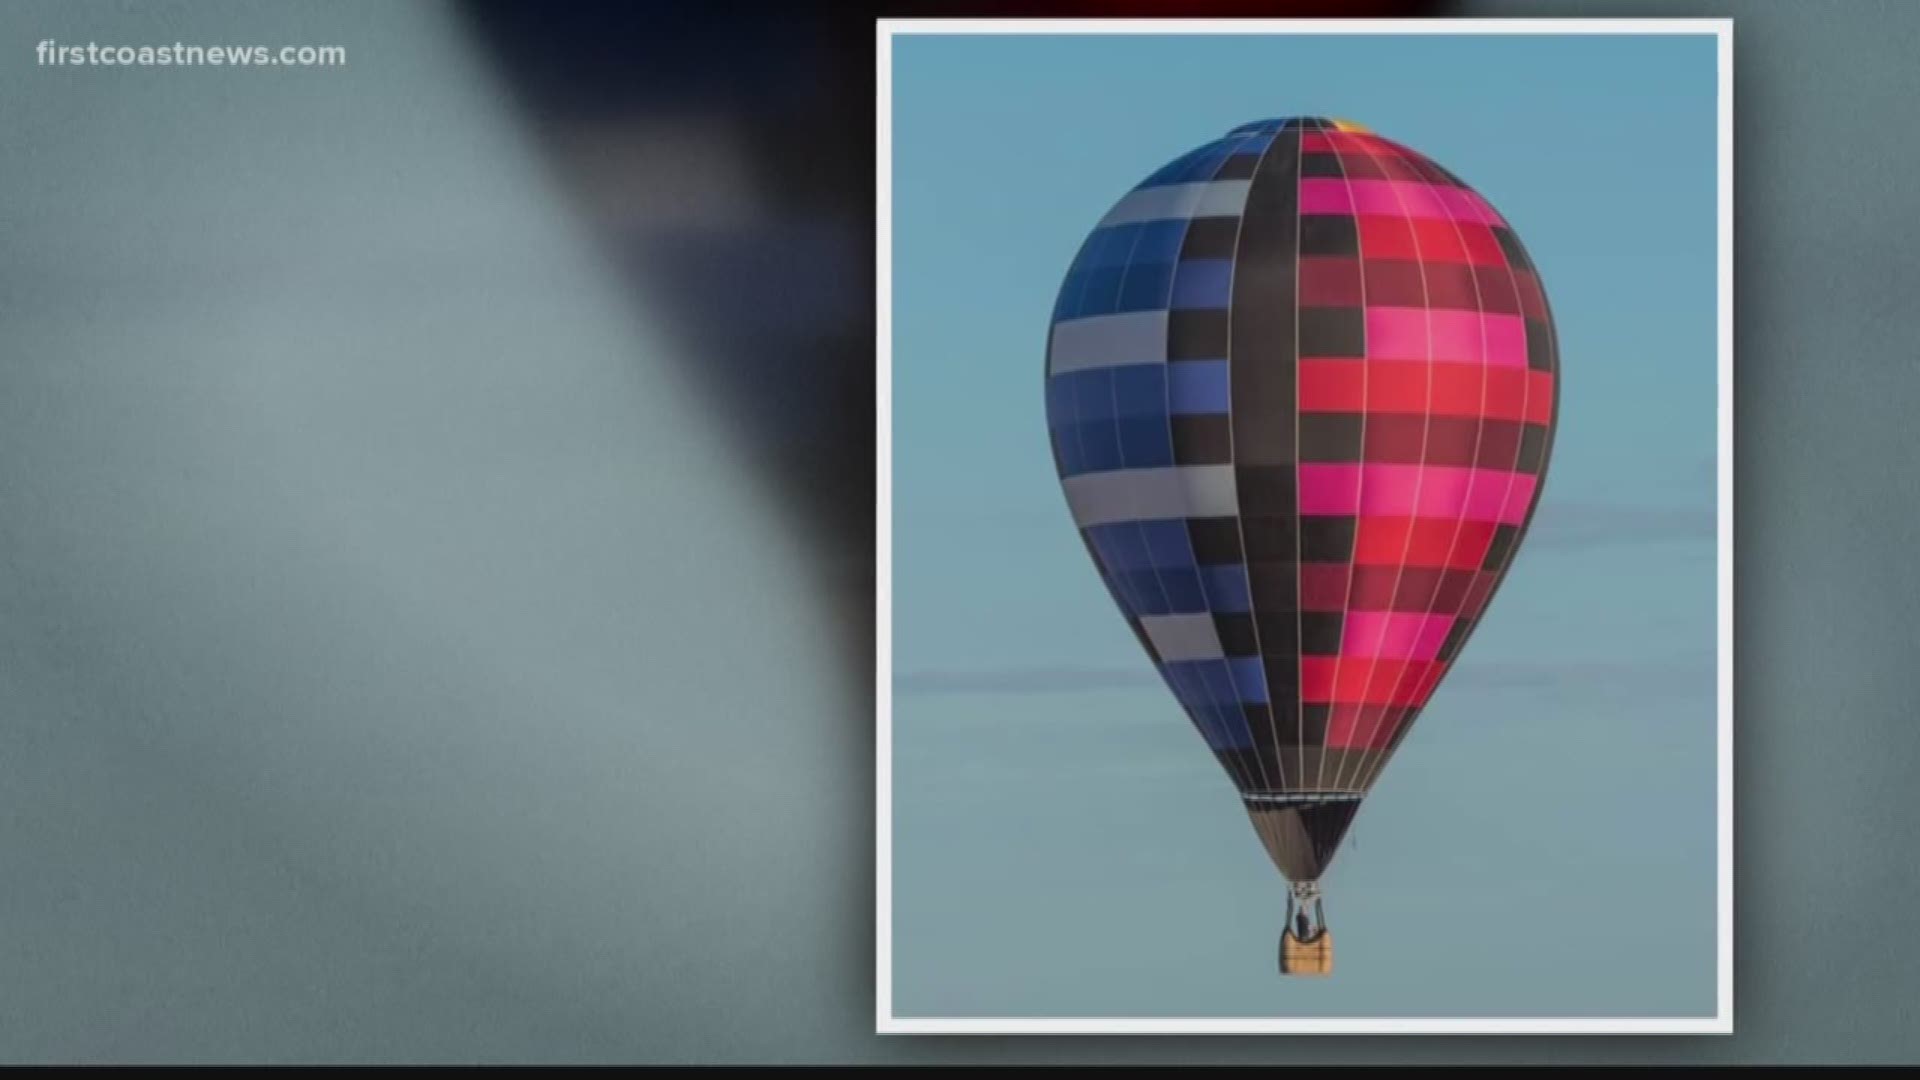 Deputies in Marion County (MCSO) were contacted by the Bloomington Police Department in Indiana over the weekend and were told that a stolen hot air balloon was spotted at The Villages Hot Air Balloon Festival.